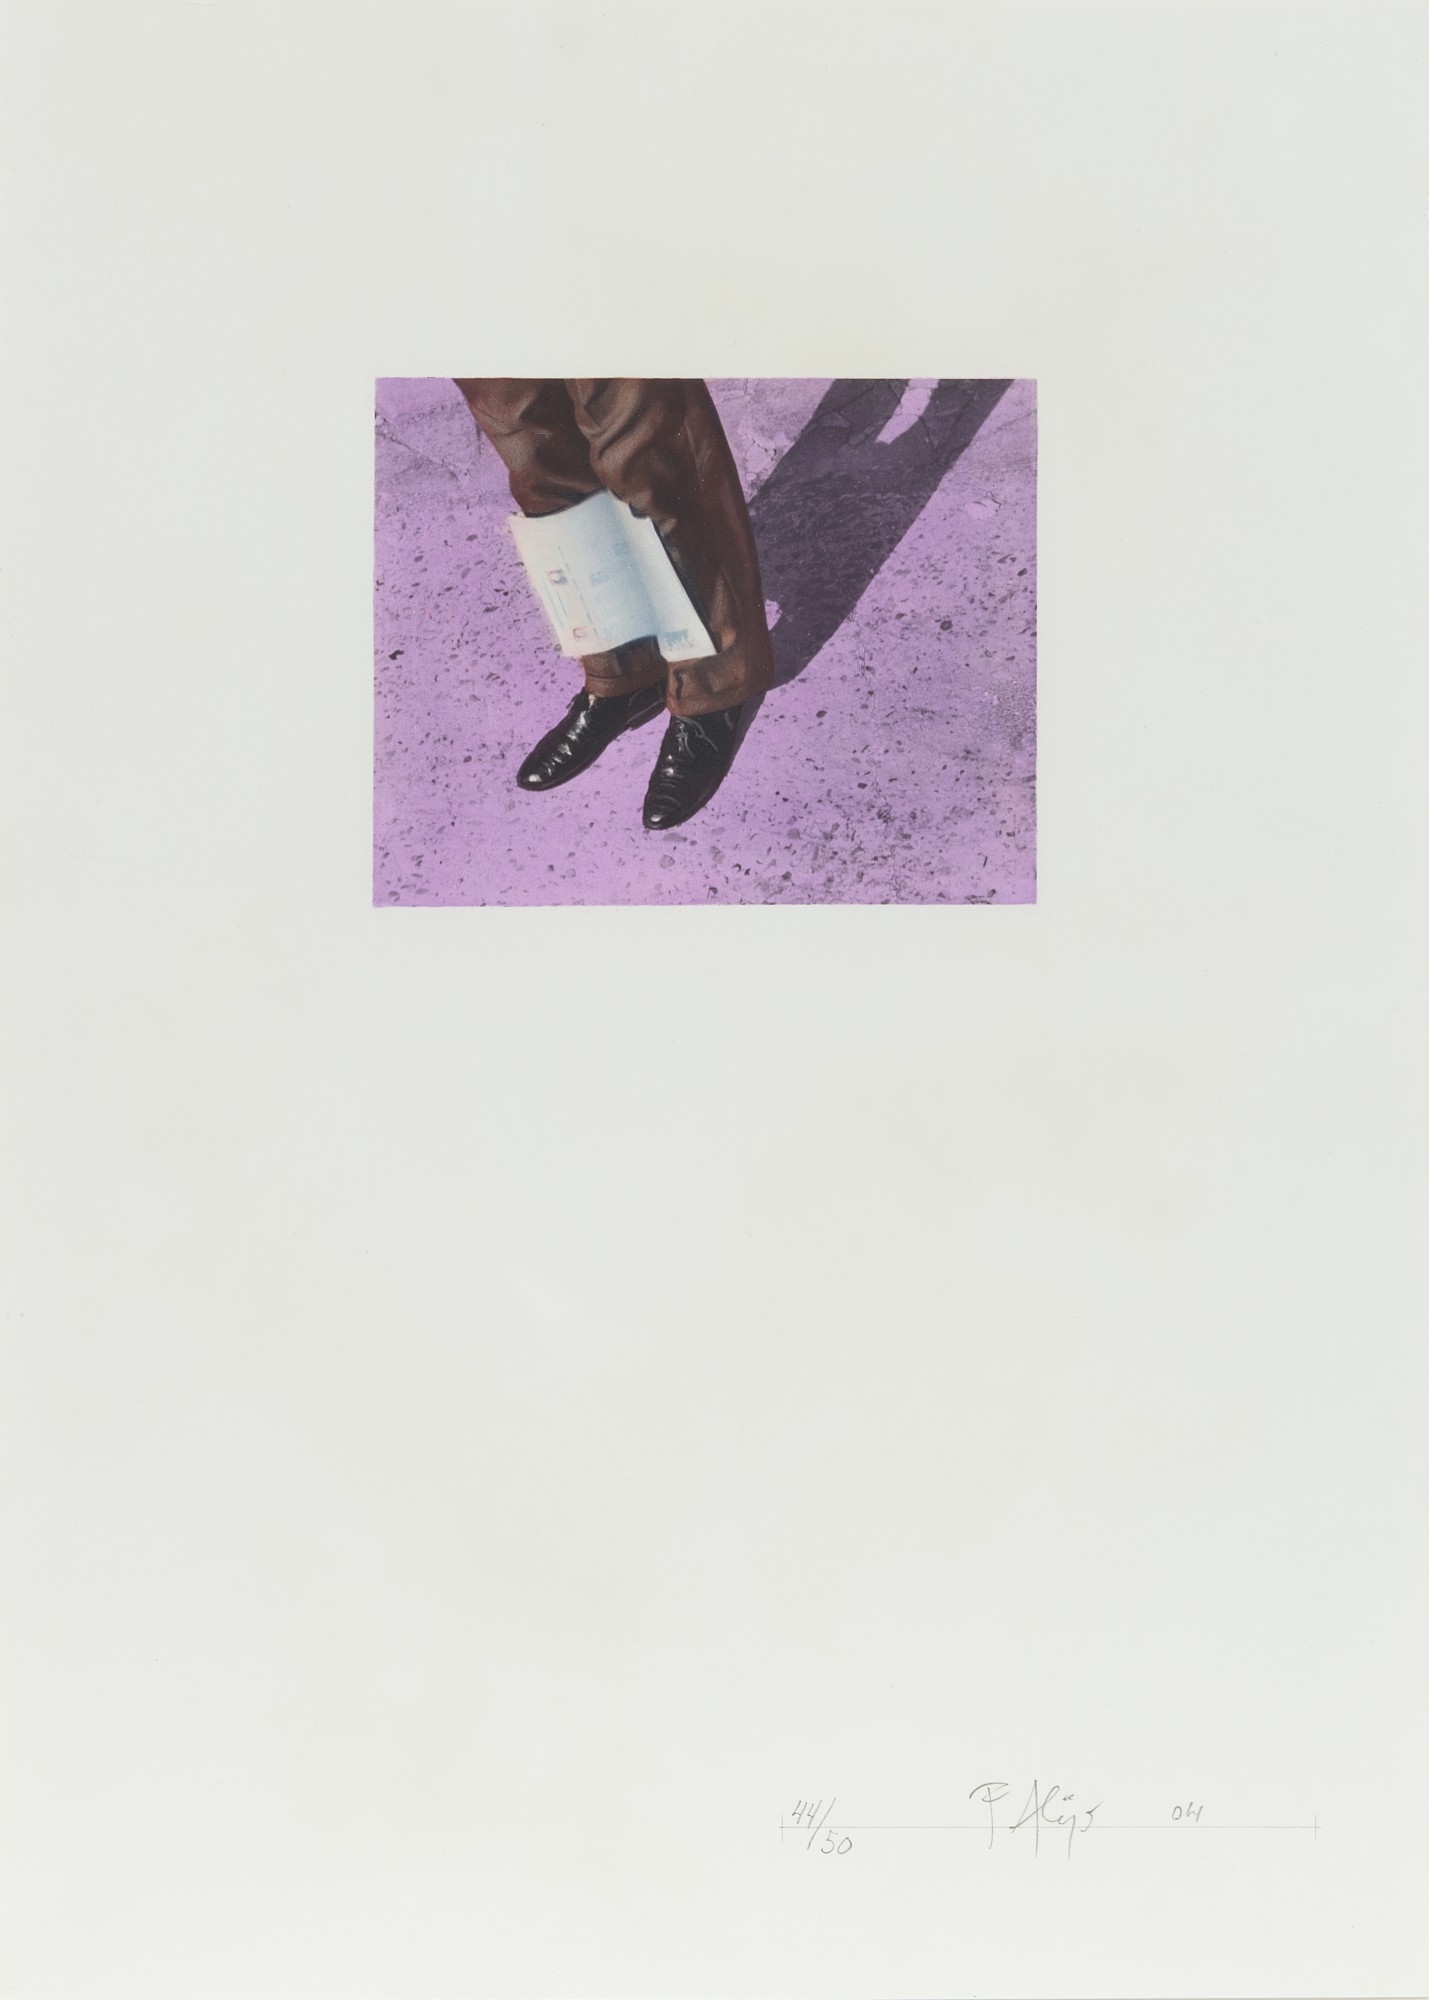 Untitled by Francis Alÿs, Executed in 2004